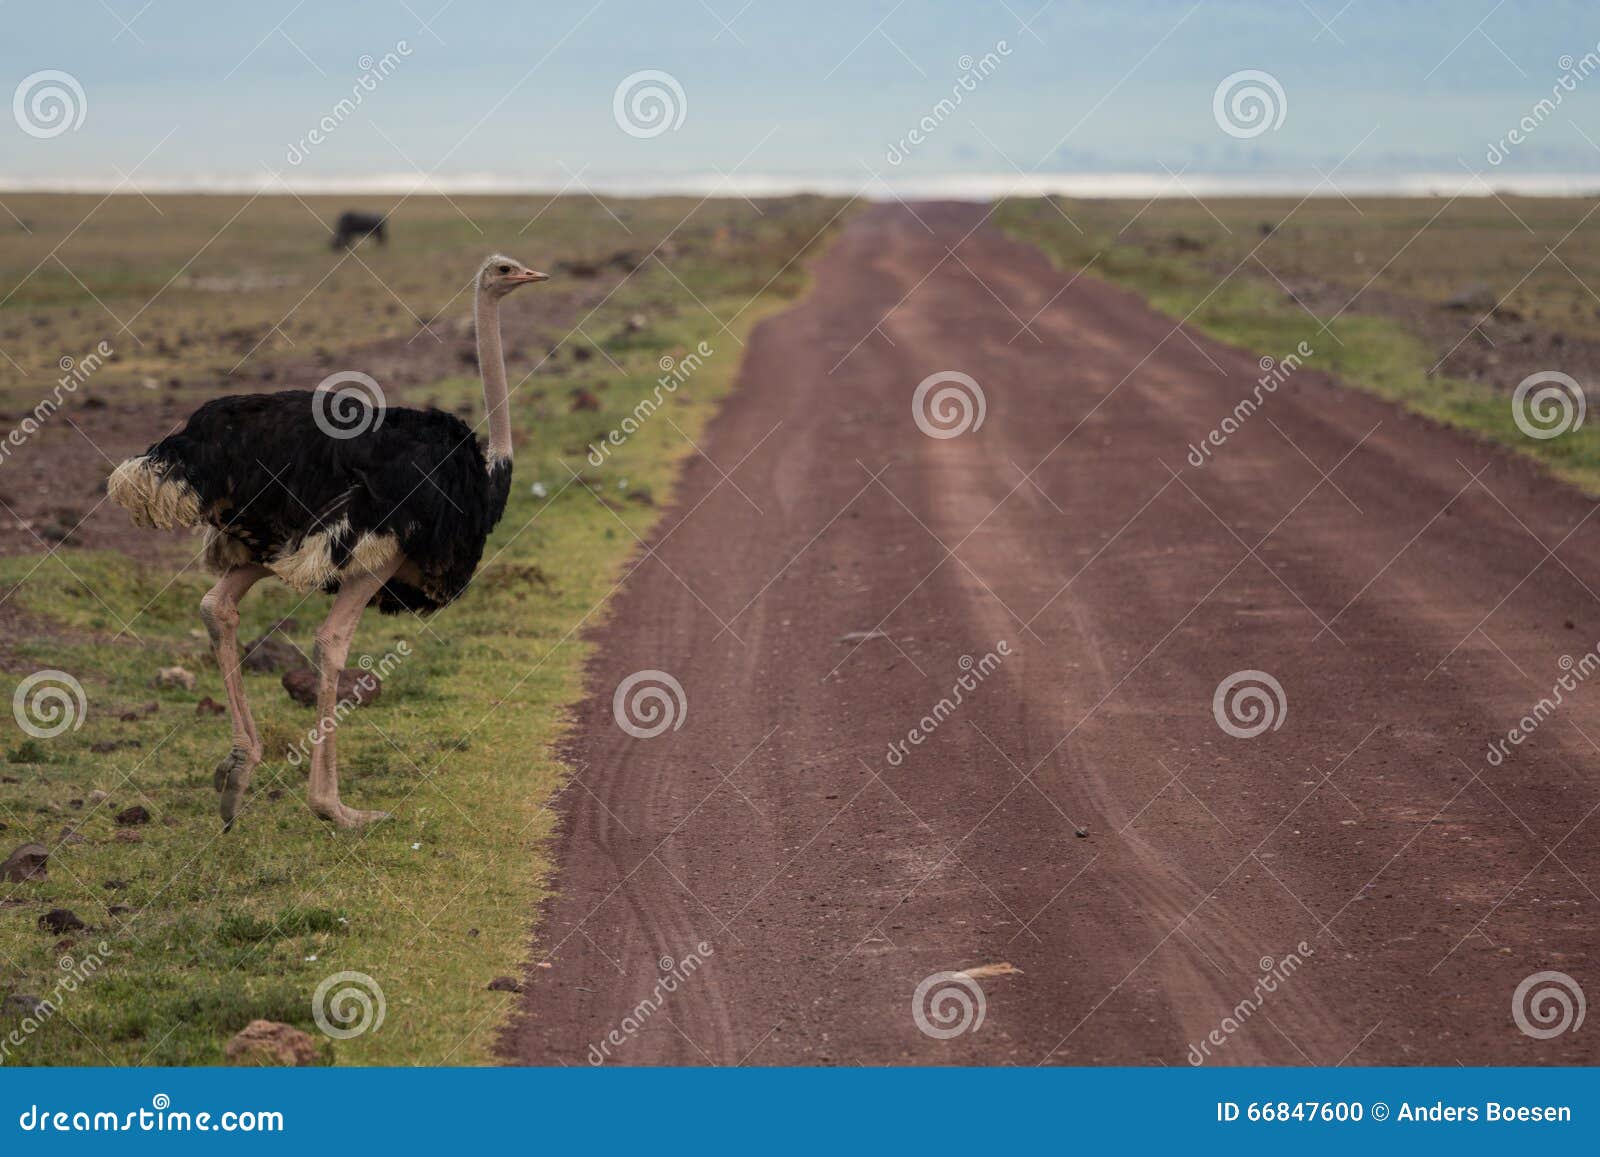 A Male Ostrich Crossing The Road Stock Photo - Image of ...